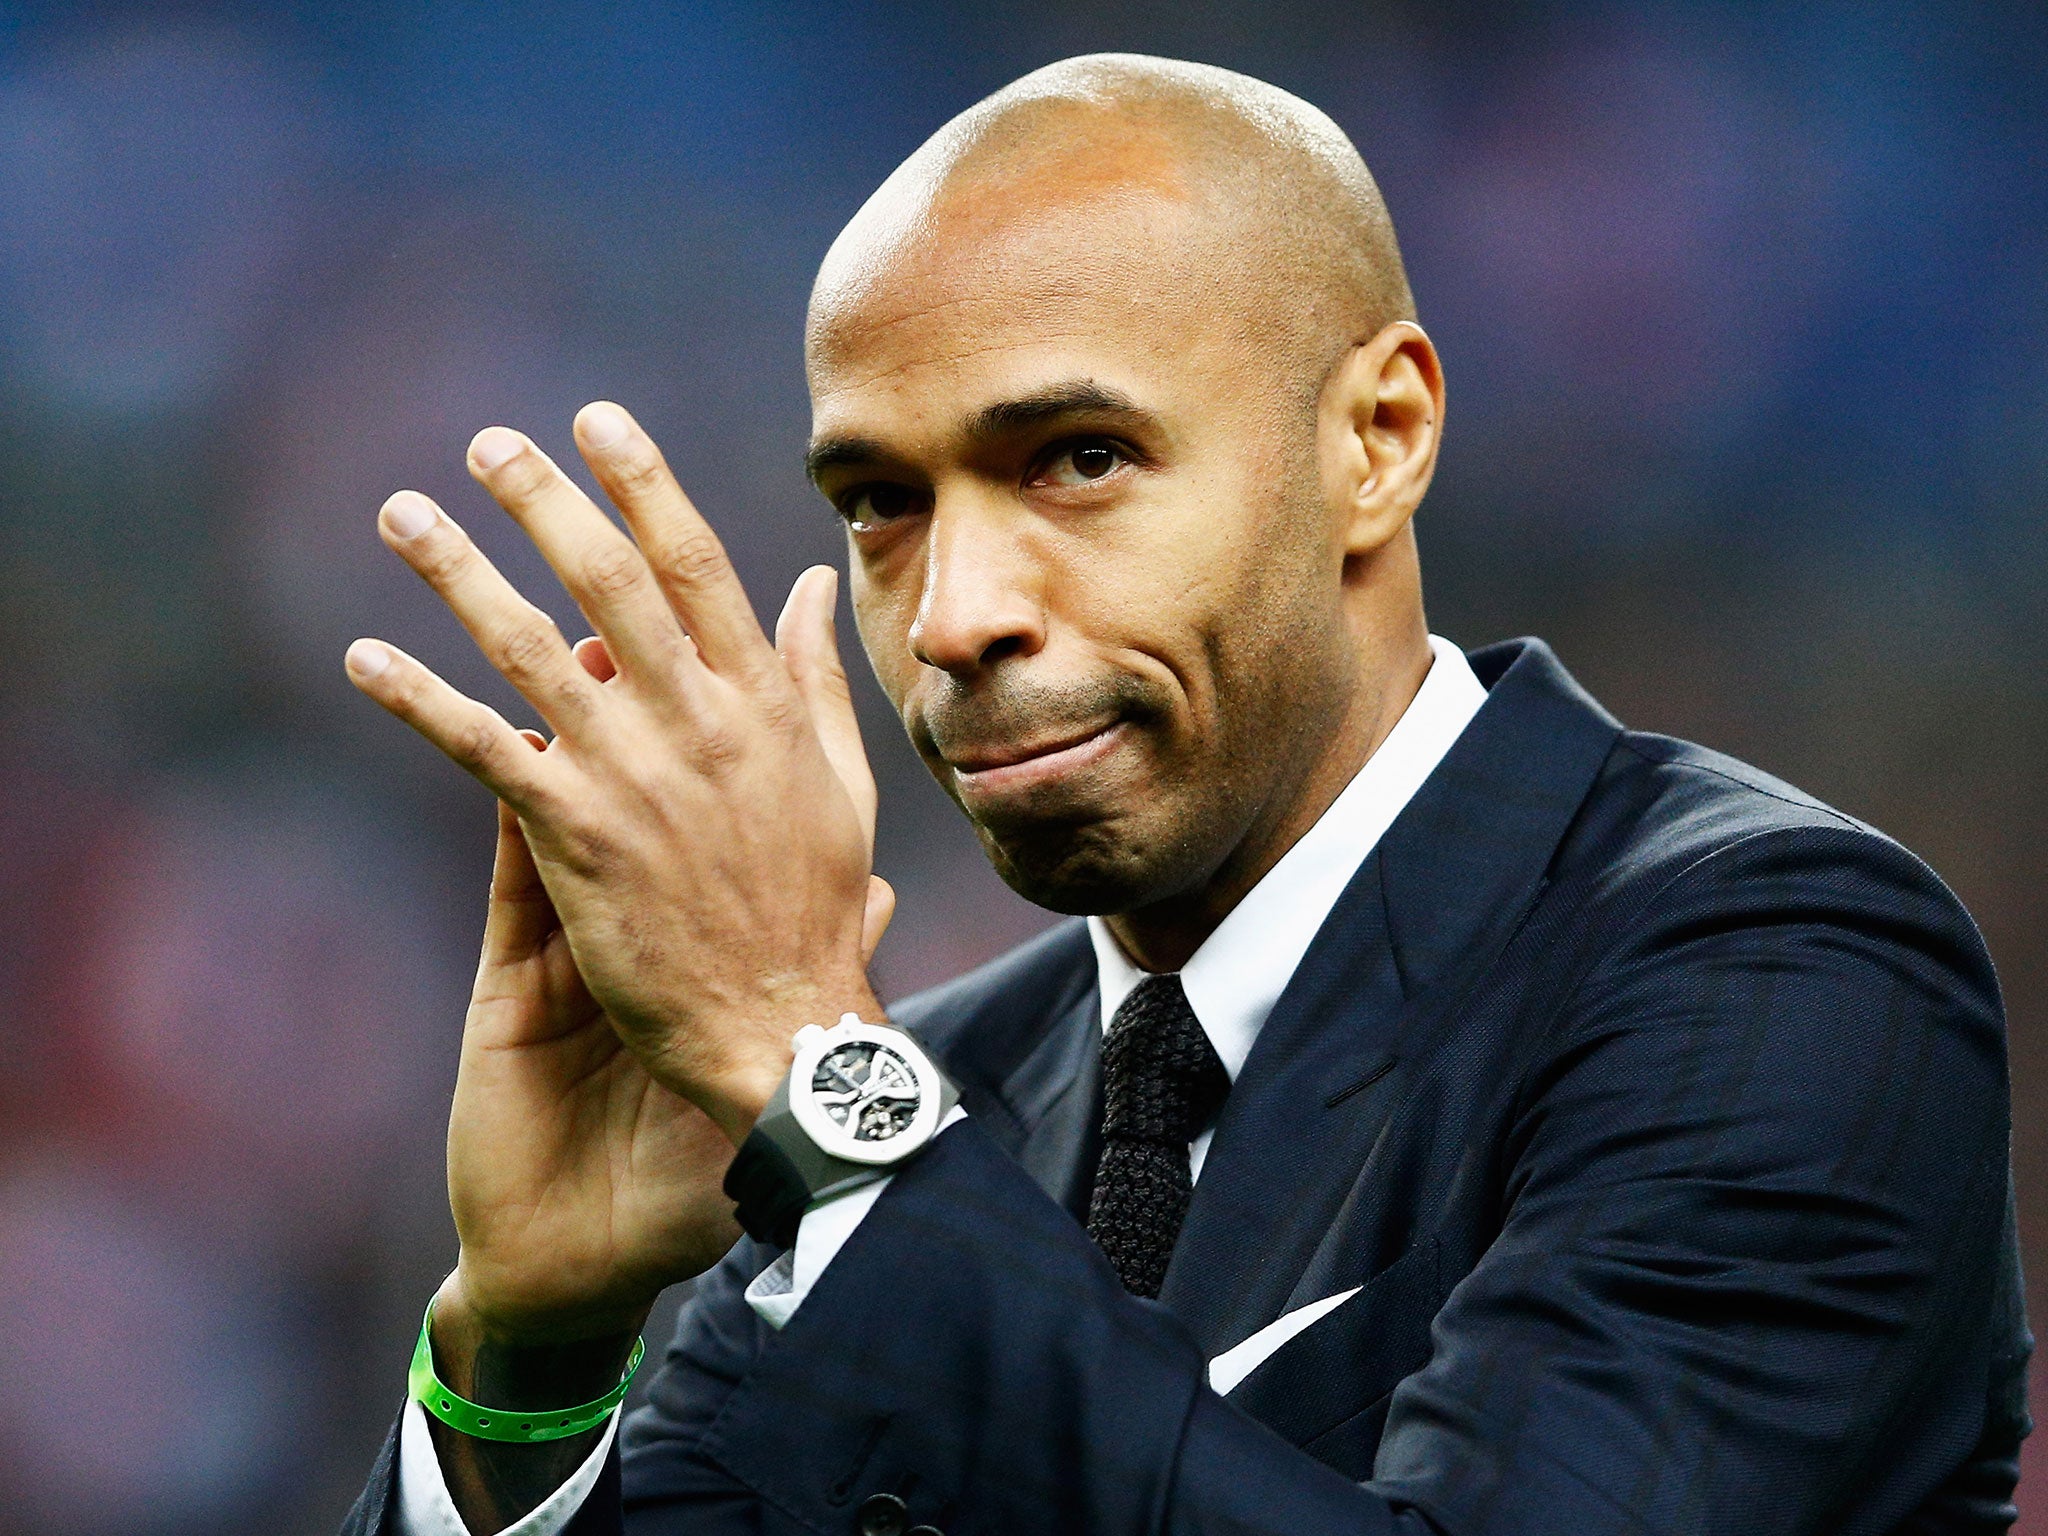 Thierry Henry was less than impressed with Javier Hernandez's celebration